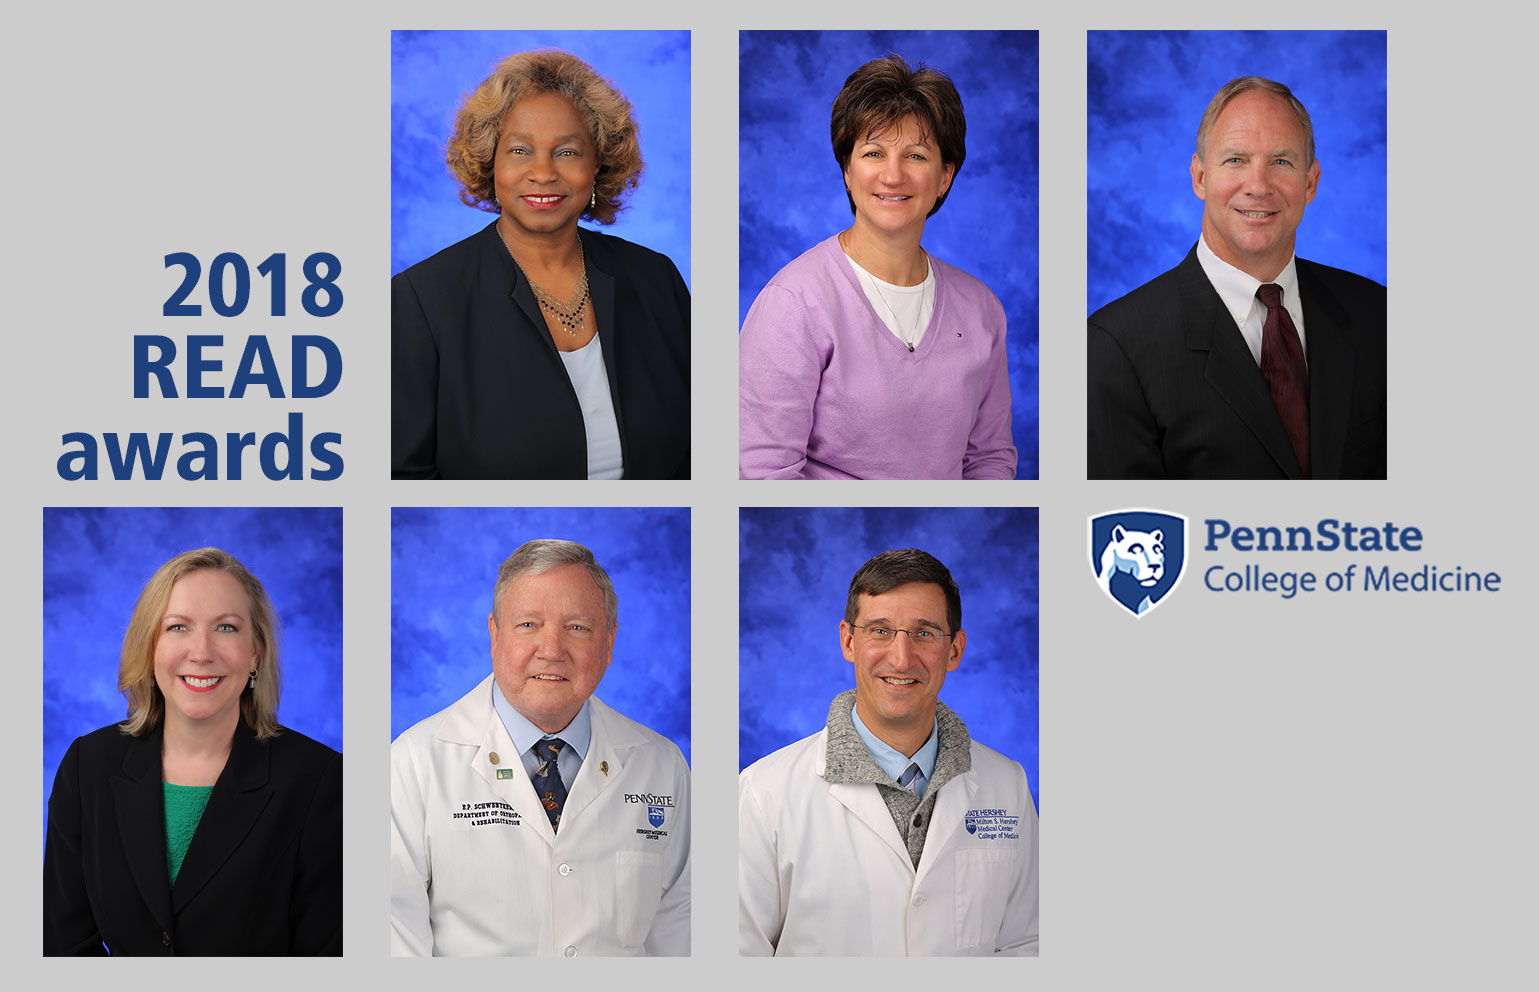 Recipients of the 2018 READ Awards given by Harrell Health Sciences Library are, from top left, Lynette Chappell-Williams, Jennifer Fenstermaker, David Gater Jr., Eileen Moser, Edward Schwentker and Mark Stephens. Professional head-and-shoulders photos of all six recipients are set on a plain-colored background with the text 